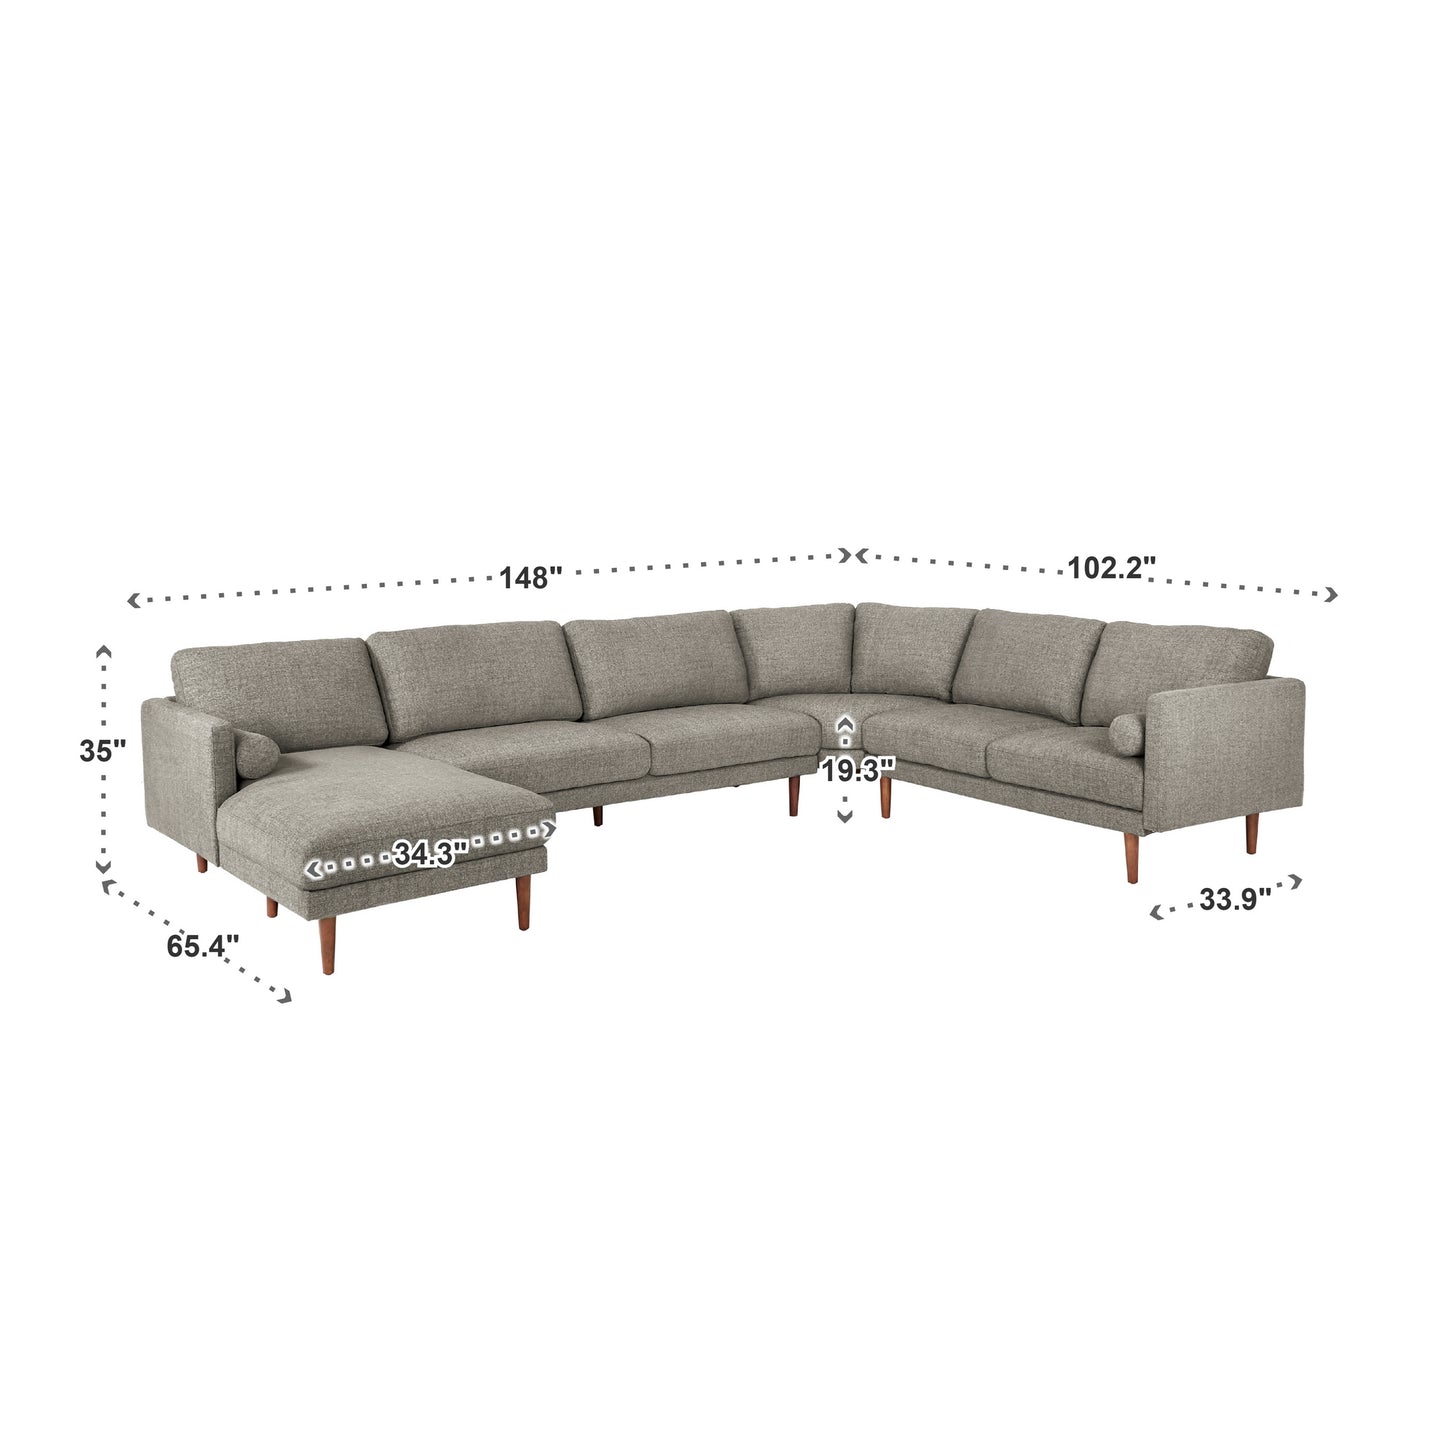 Mid-Century Upholstered Sectional Sofa - Light Grey, 7-Seat, U-Shape Sectional with Left-Facing Chaise